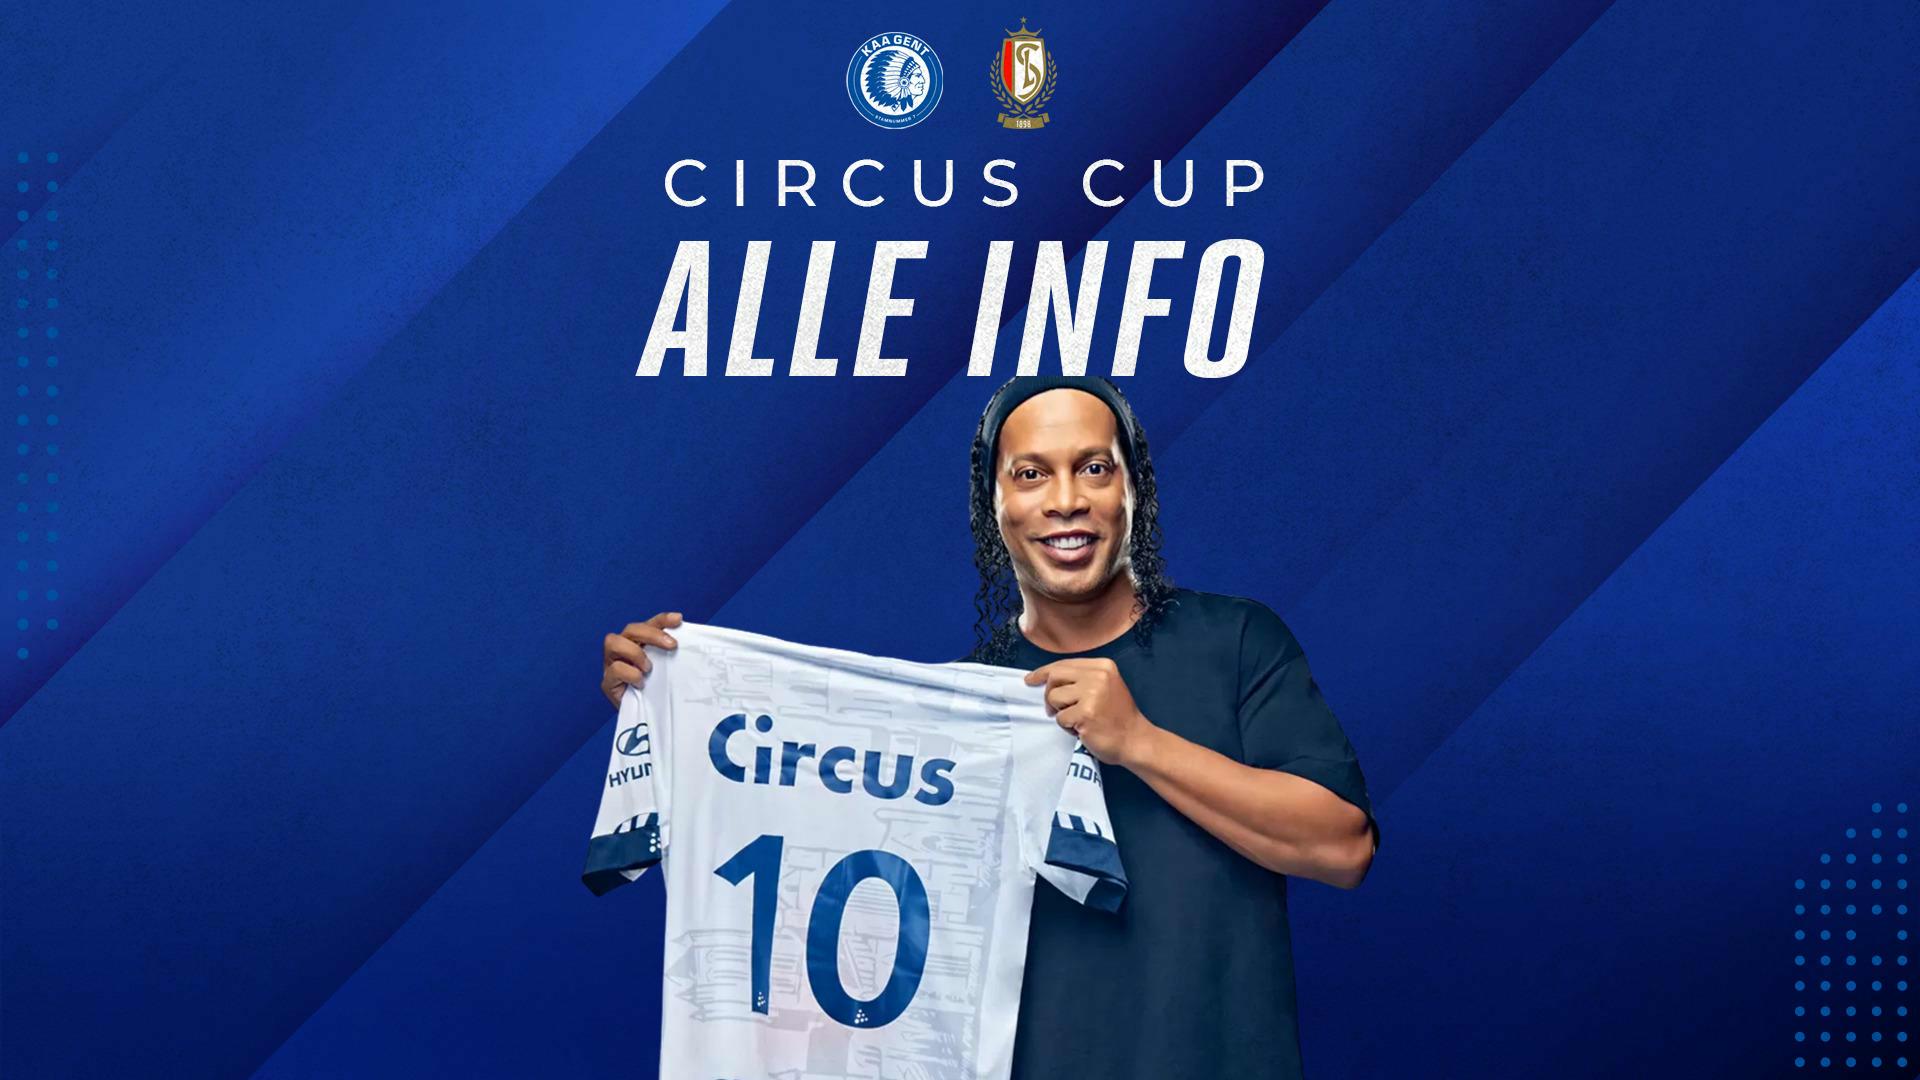 Alle info Circus Cup